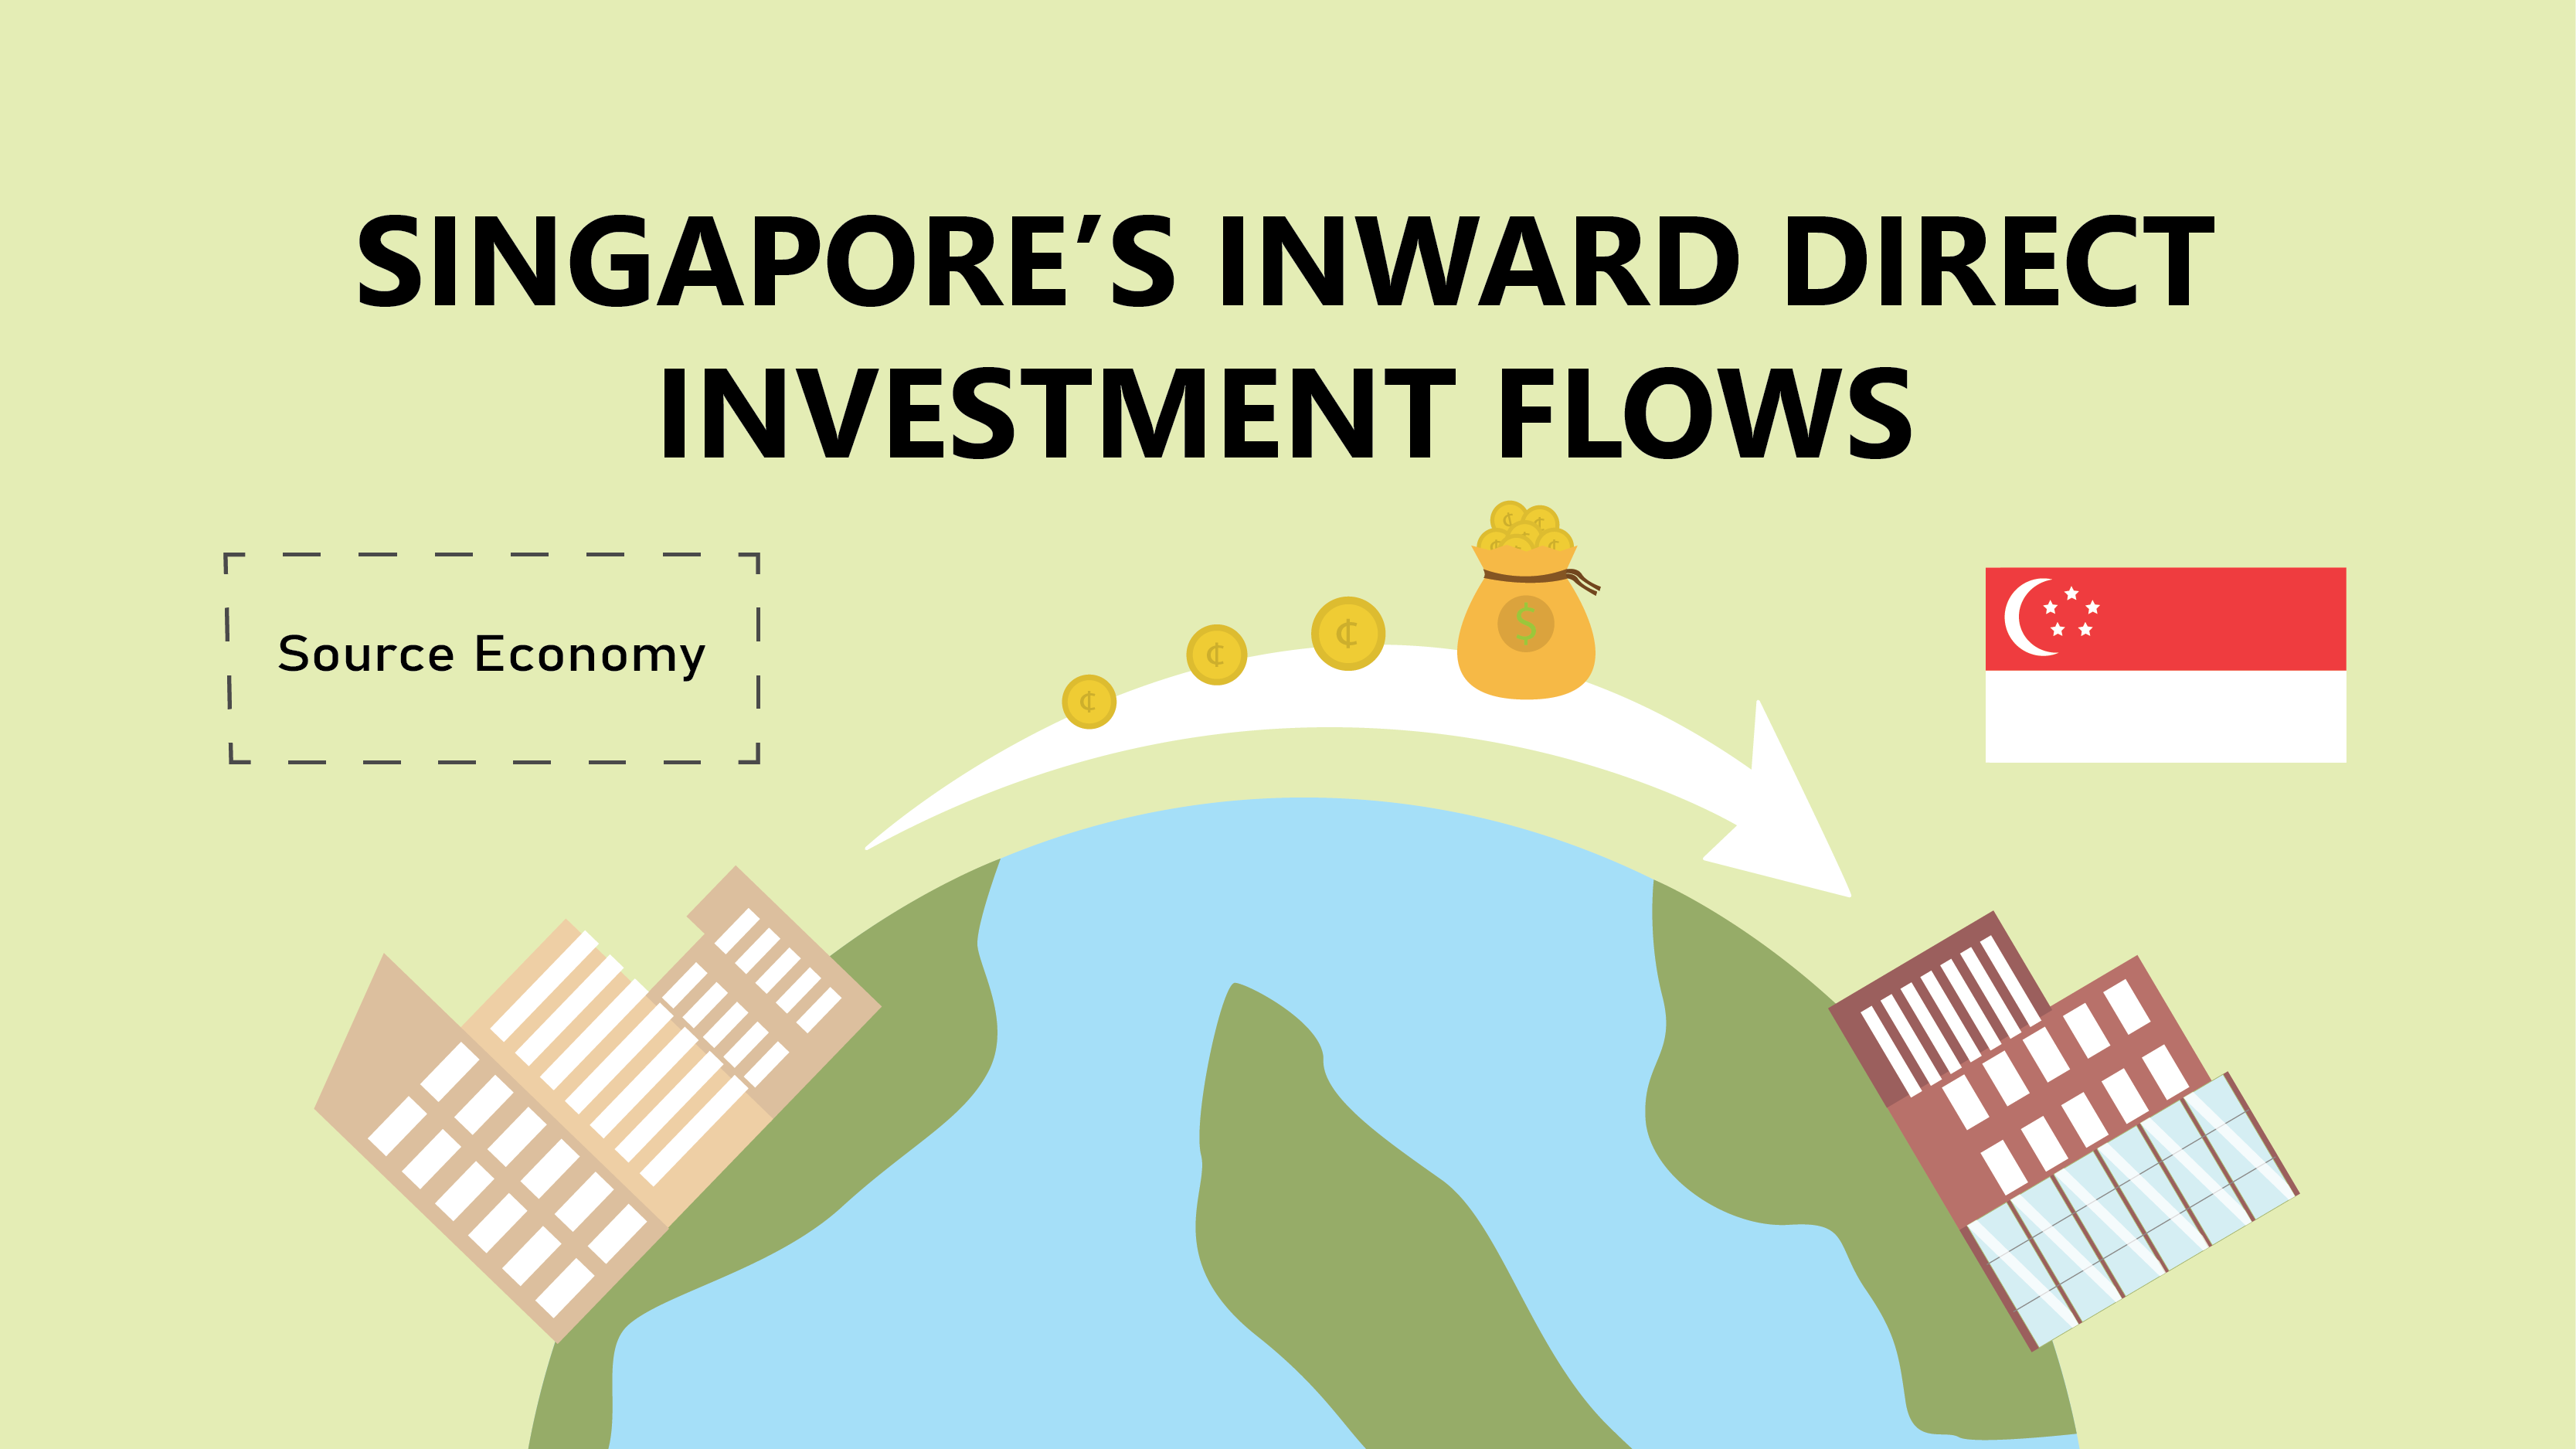 Singapore's Inward Direct Investment Flows Dashboard